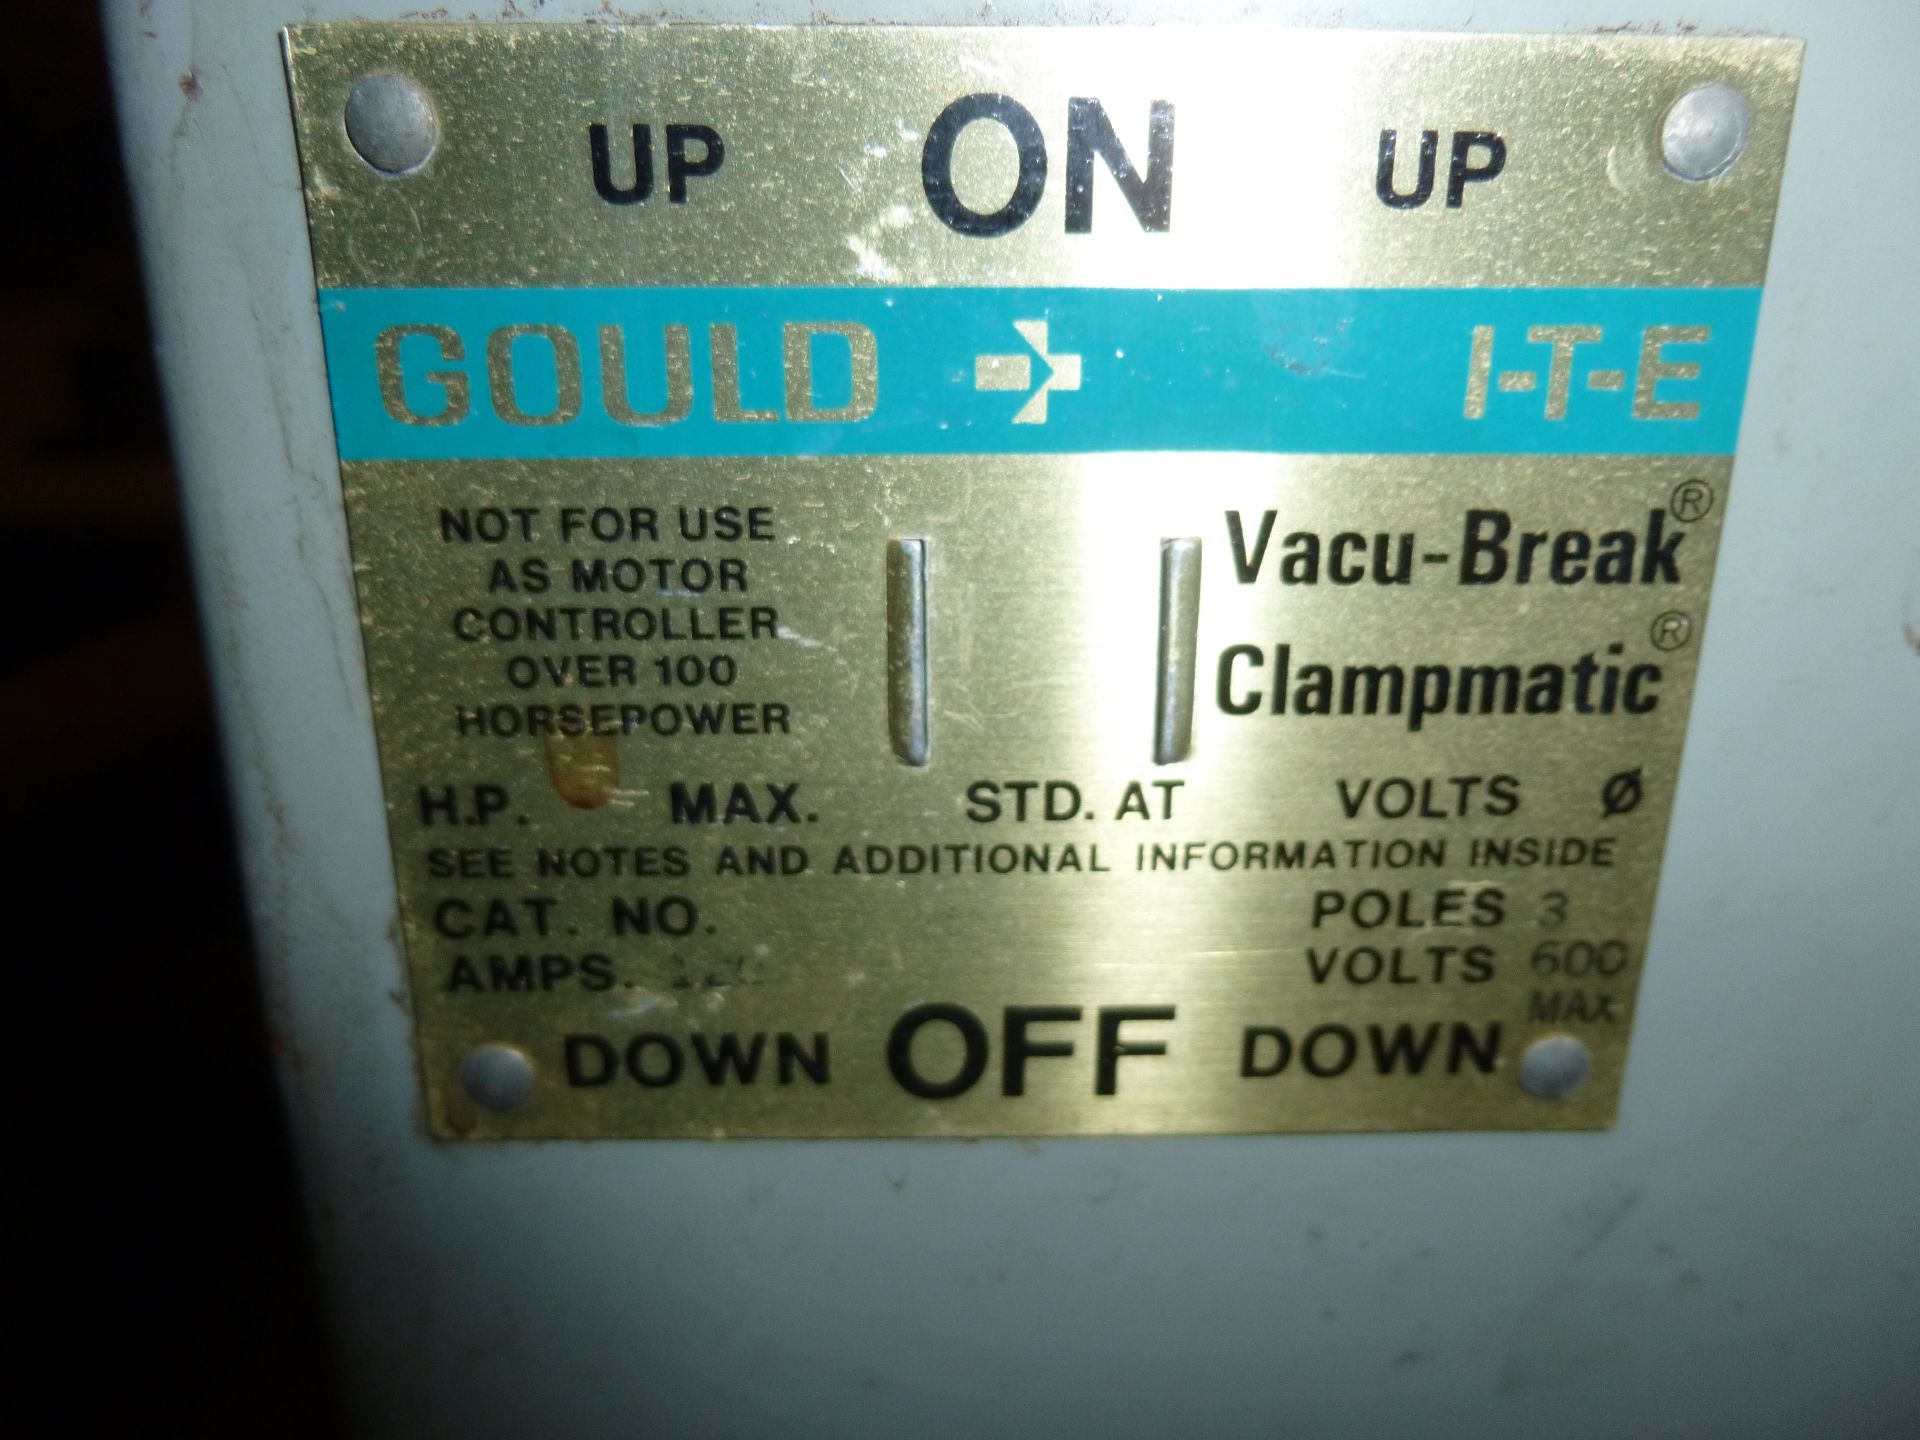 Gould ITE 600v Vacu-Break Clampmatic fused main disconnect rated up to 100hp motor, 600volt max - Image 2 of 4